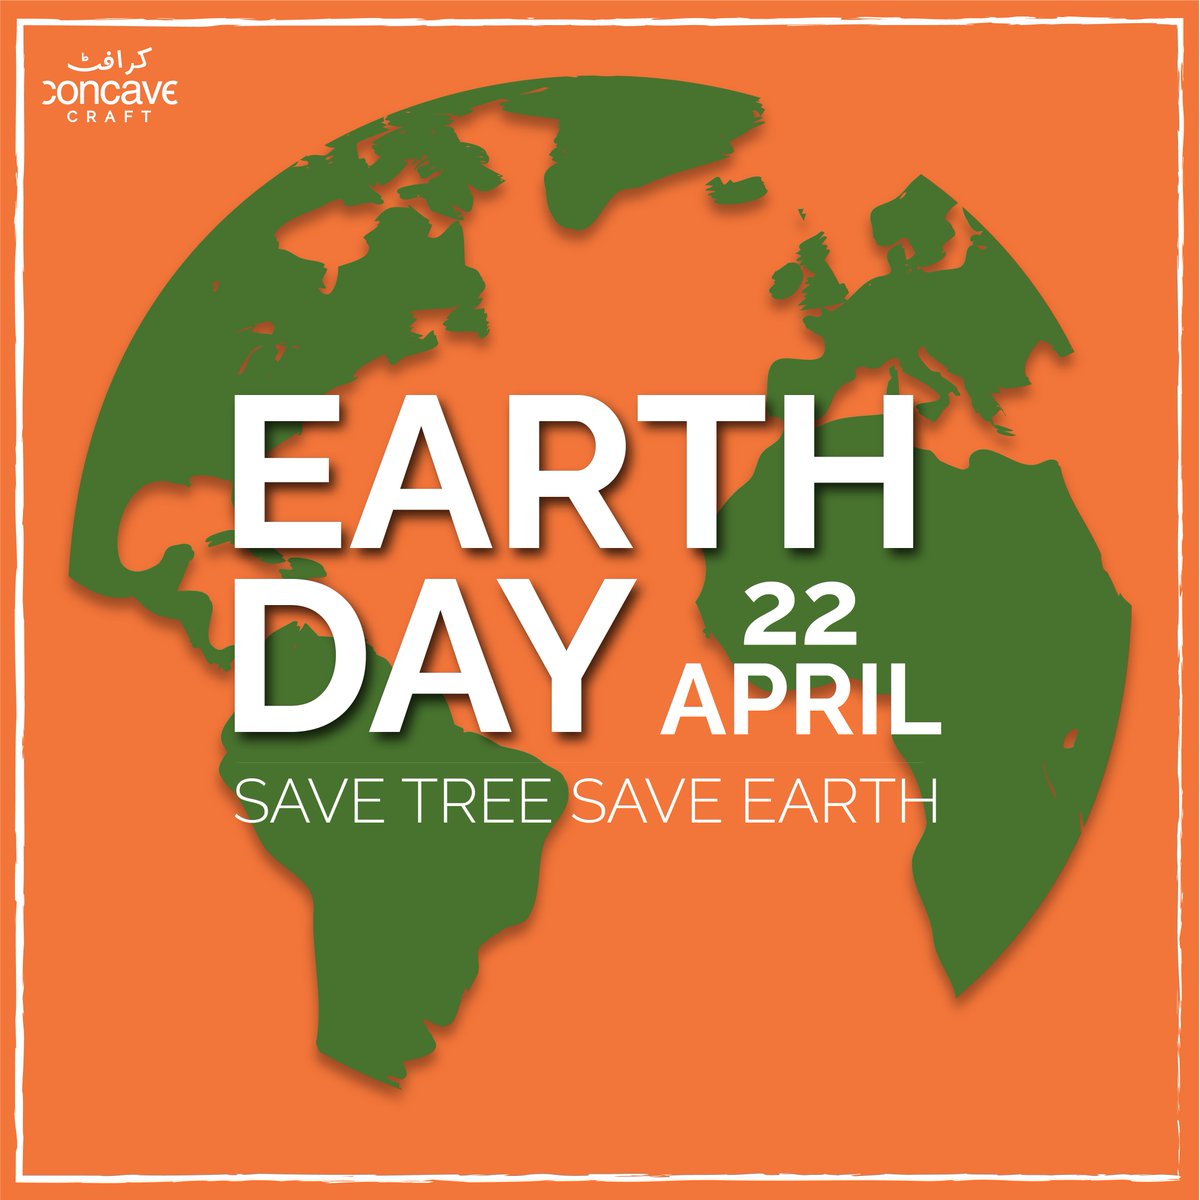 Let's join hands to protect and heal our planet, for ourselves, and for future generations. Happy Earth Day! 
#EarthDay #ProtectOurPlanet #HealTheEarth #SustainableLiving #ClimateActionNow #TogetherForThePlanet